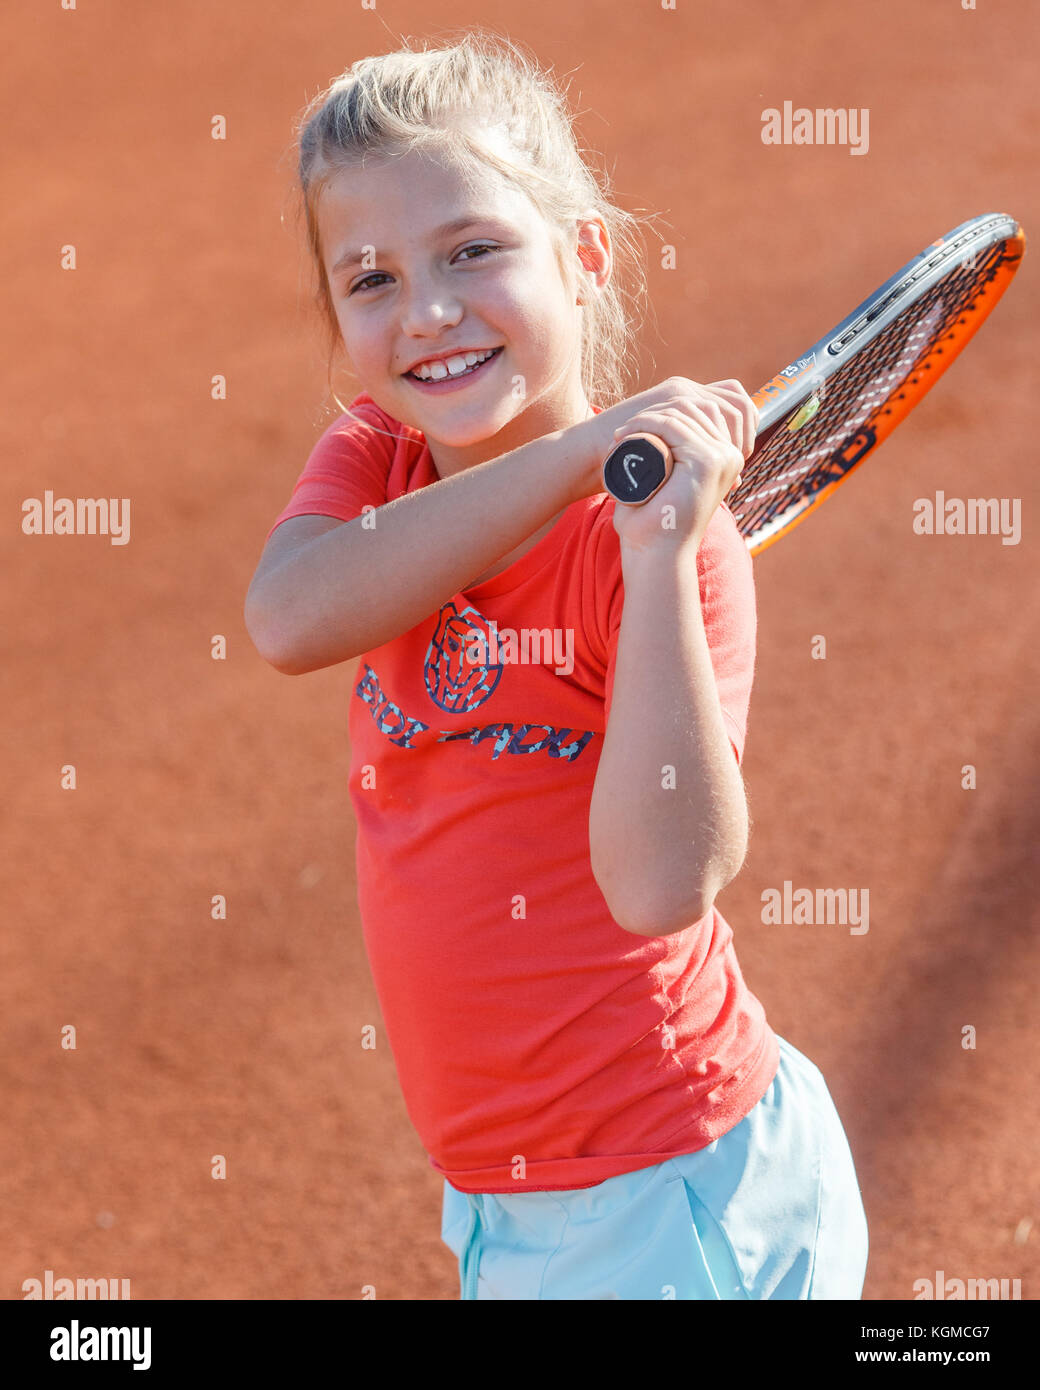 young girl (8)0 playing tennis Stock Photo